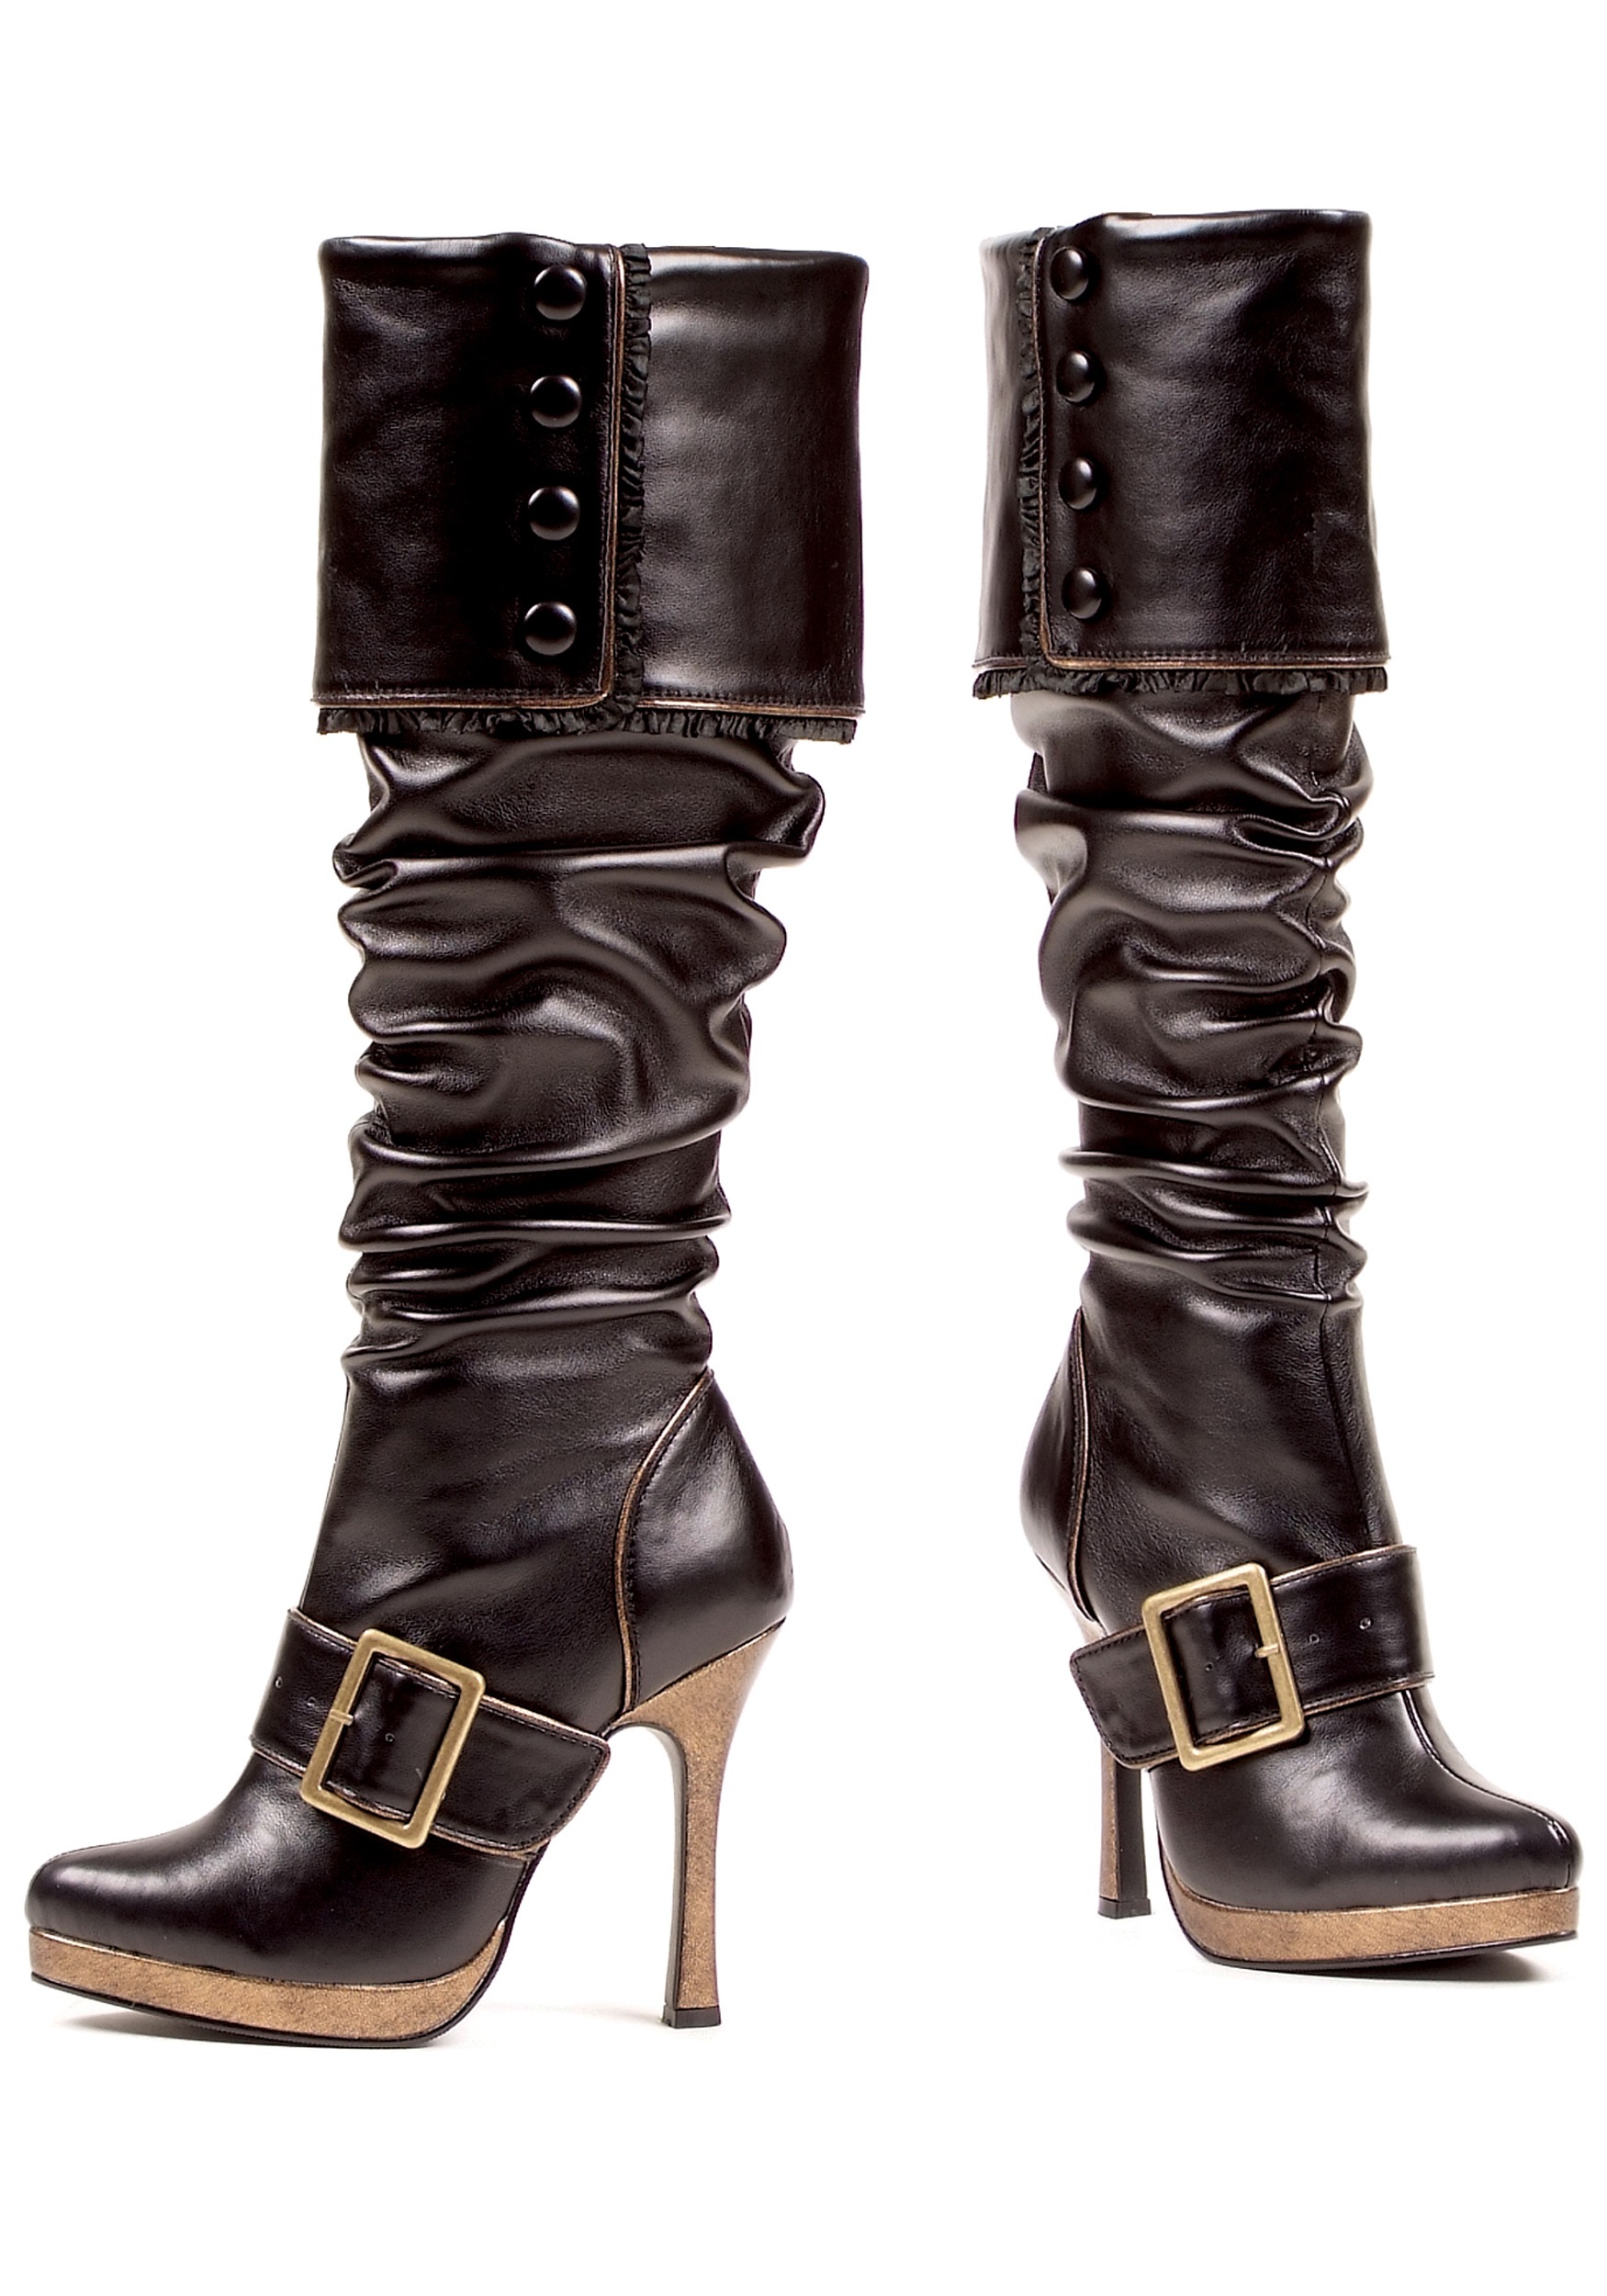 Image of Women's Sexy Buckle Pirate Boots ID EE426GRACE-8